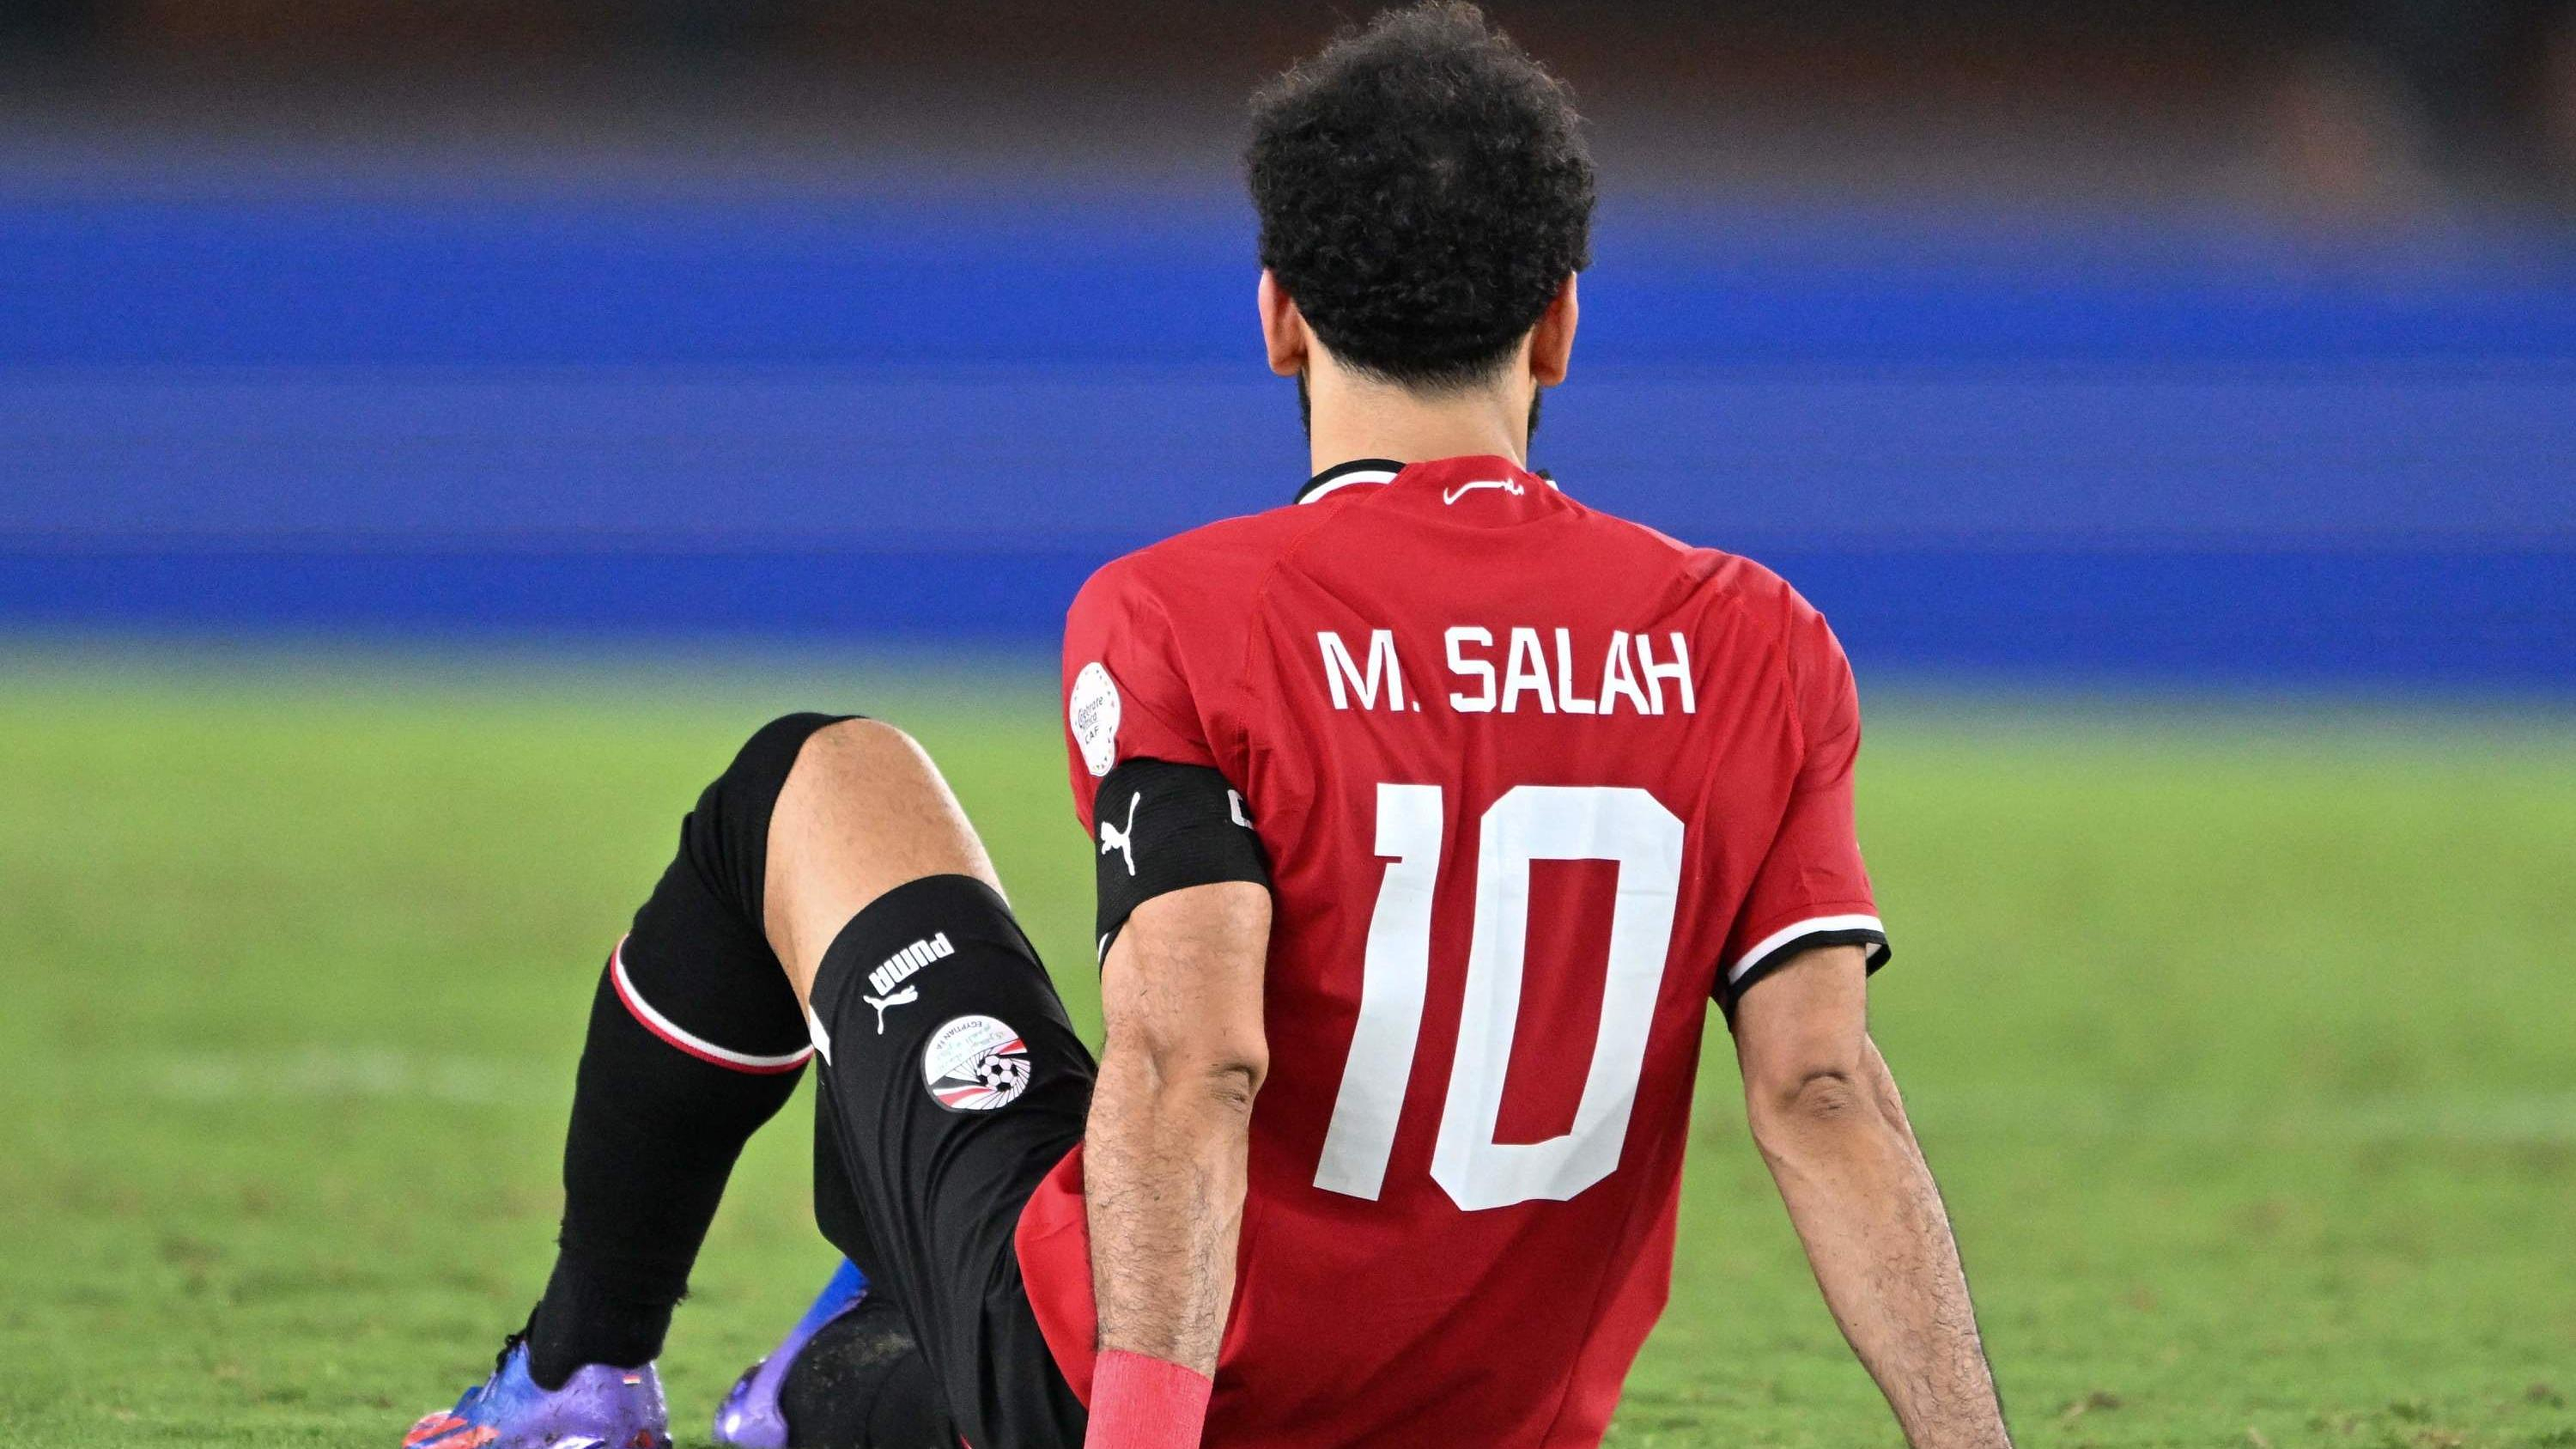 CAN: Salah absent longer than expected with Egypt